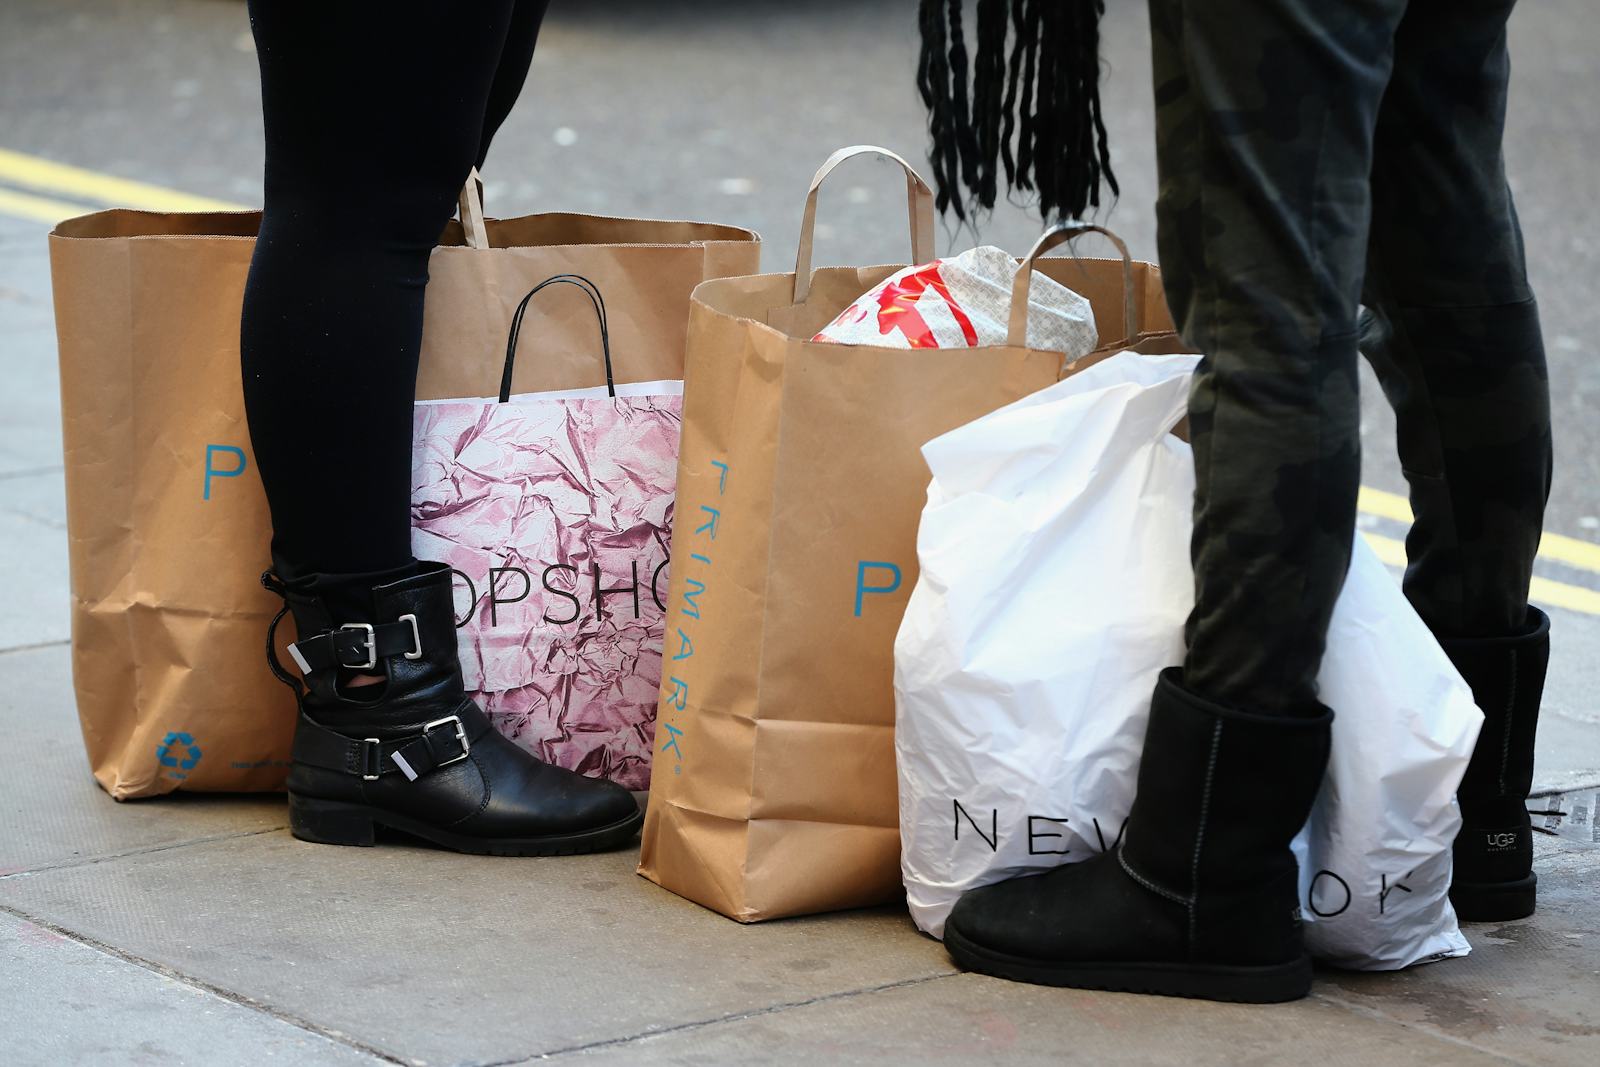 5 Surprising Things We Learned About Our 2014 Shopping Habits